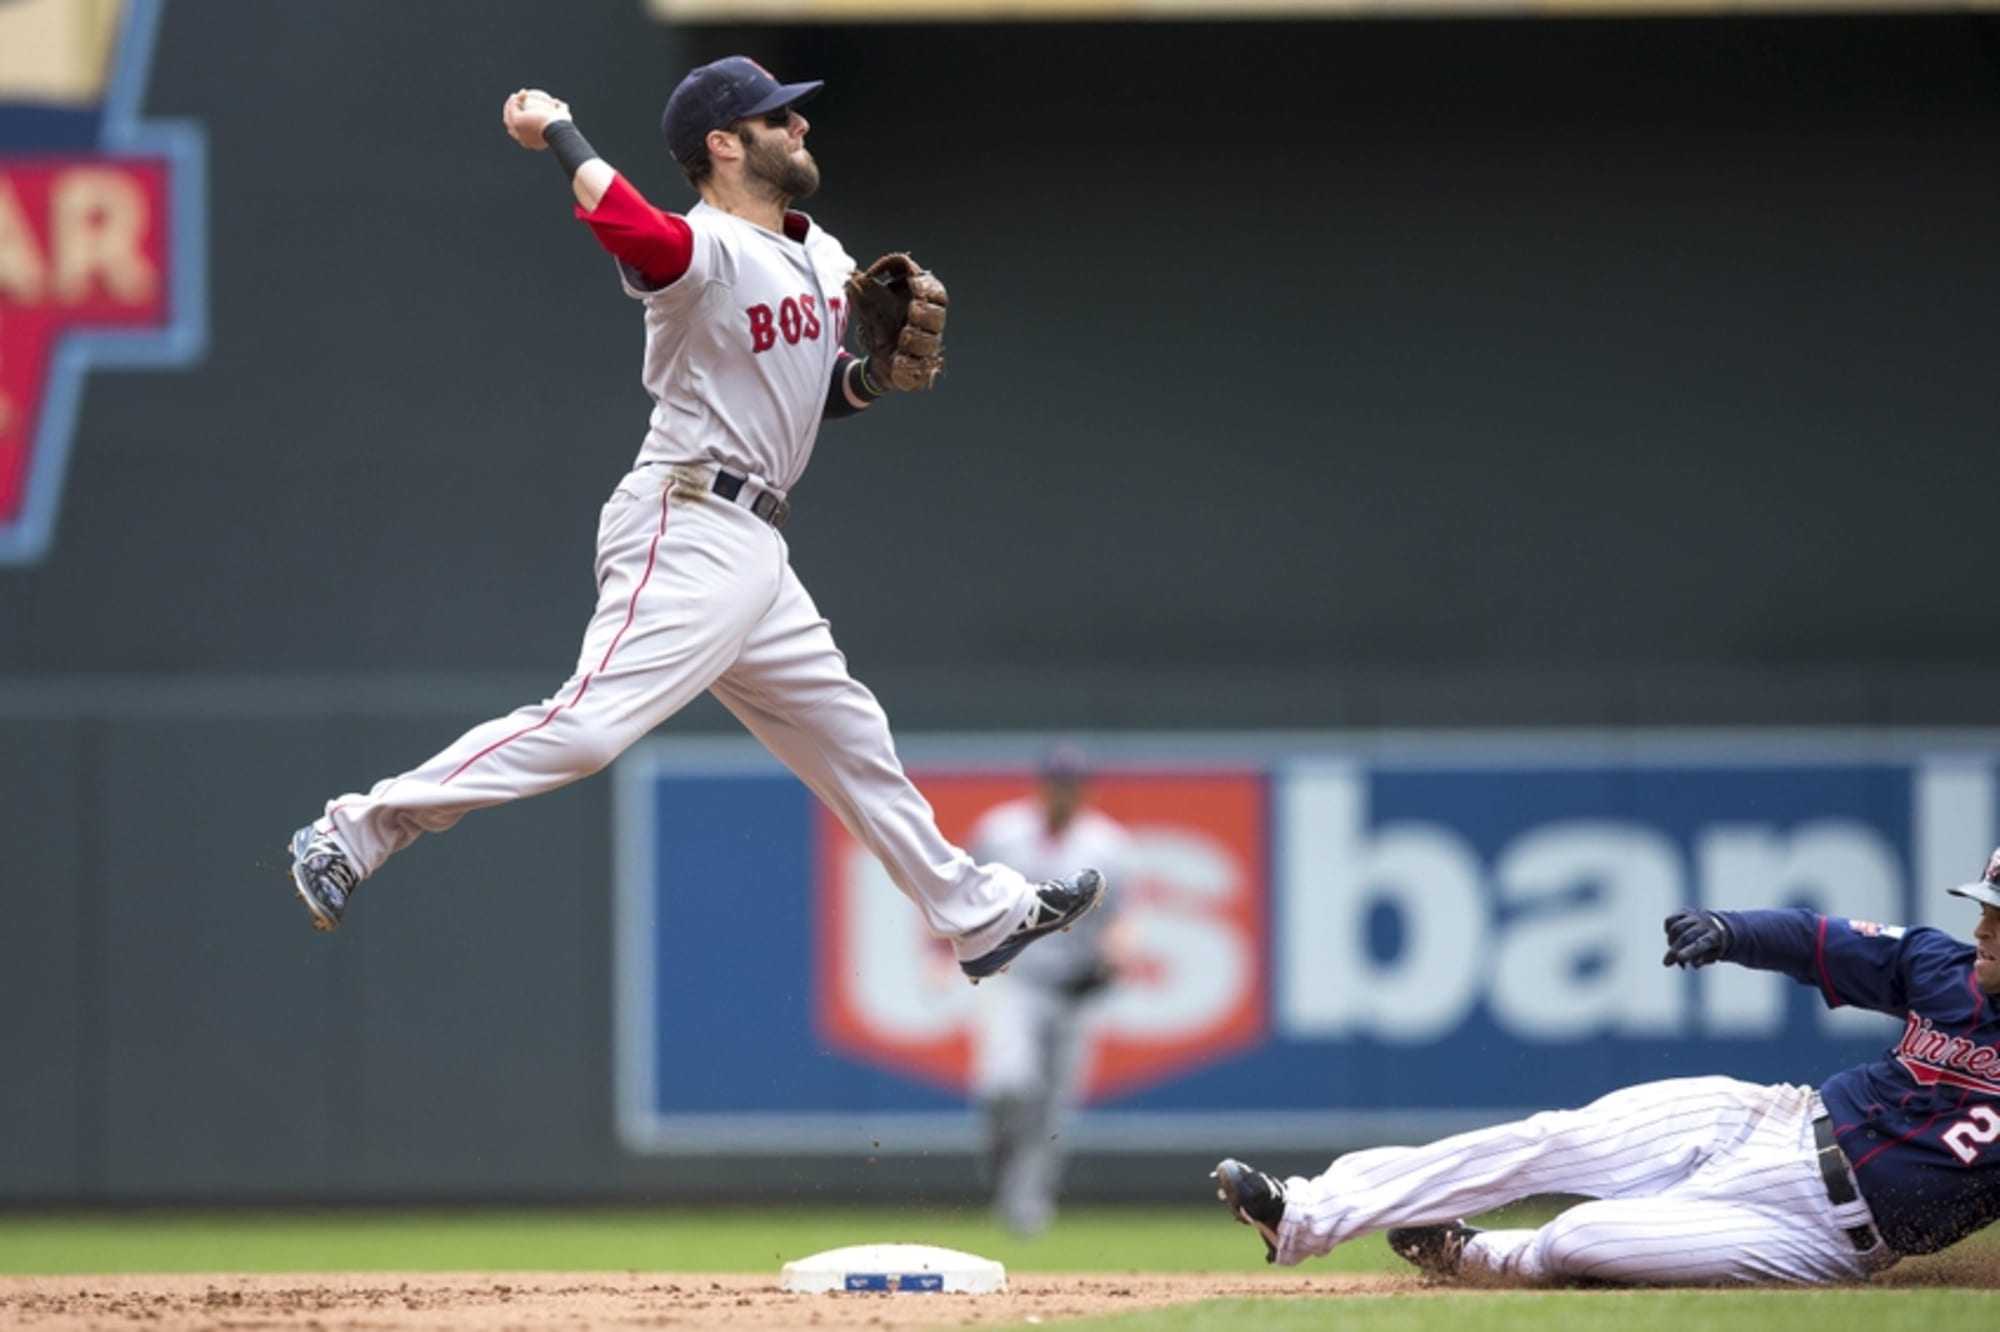  The Last of the Old Guard: Pedey to Hang ‘Em Up